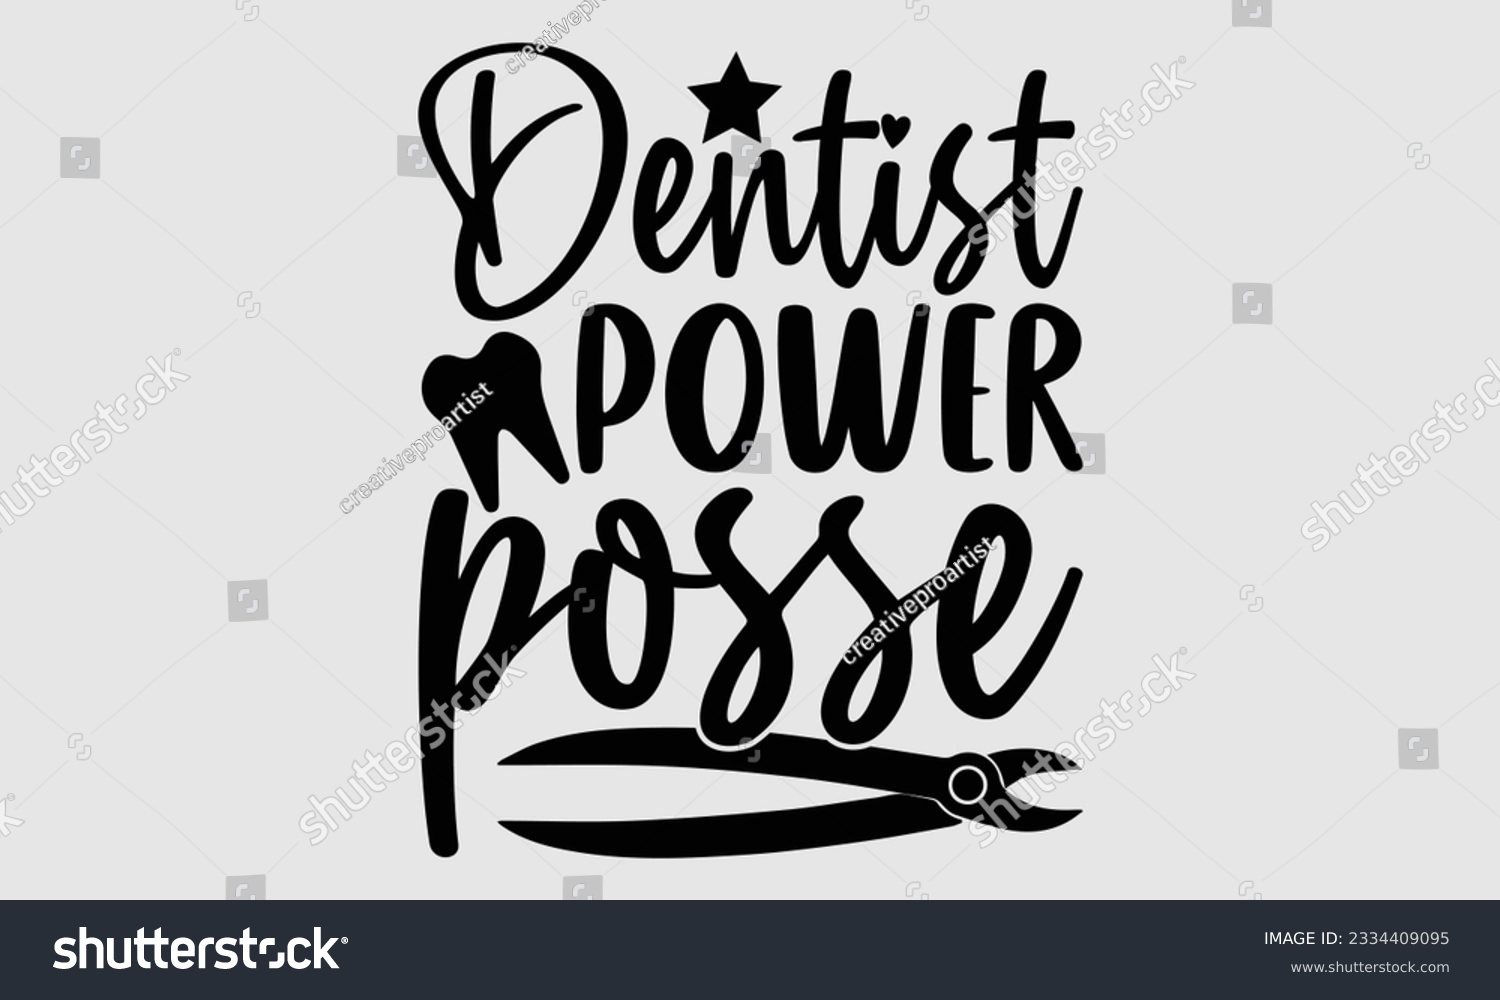 SVG of Dentist Power Posse- Dentist t-shirt design, This illustration can be used as a print on SVG and bags, stationary or as a poster, Vector illustration Template. svg